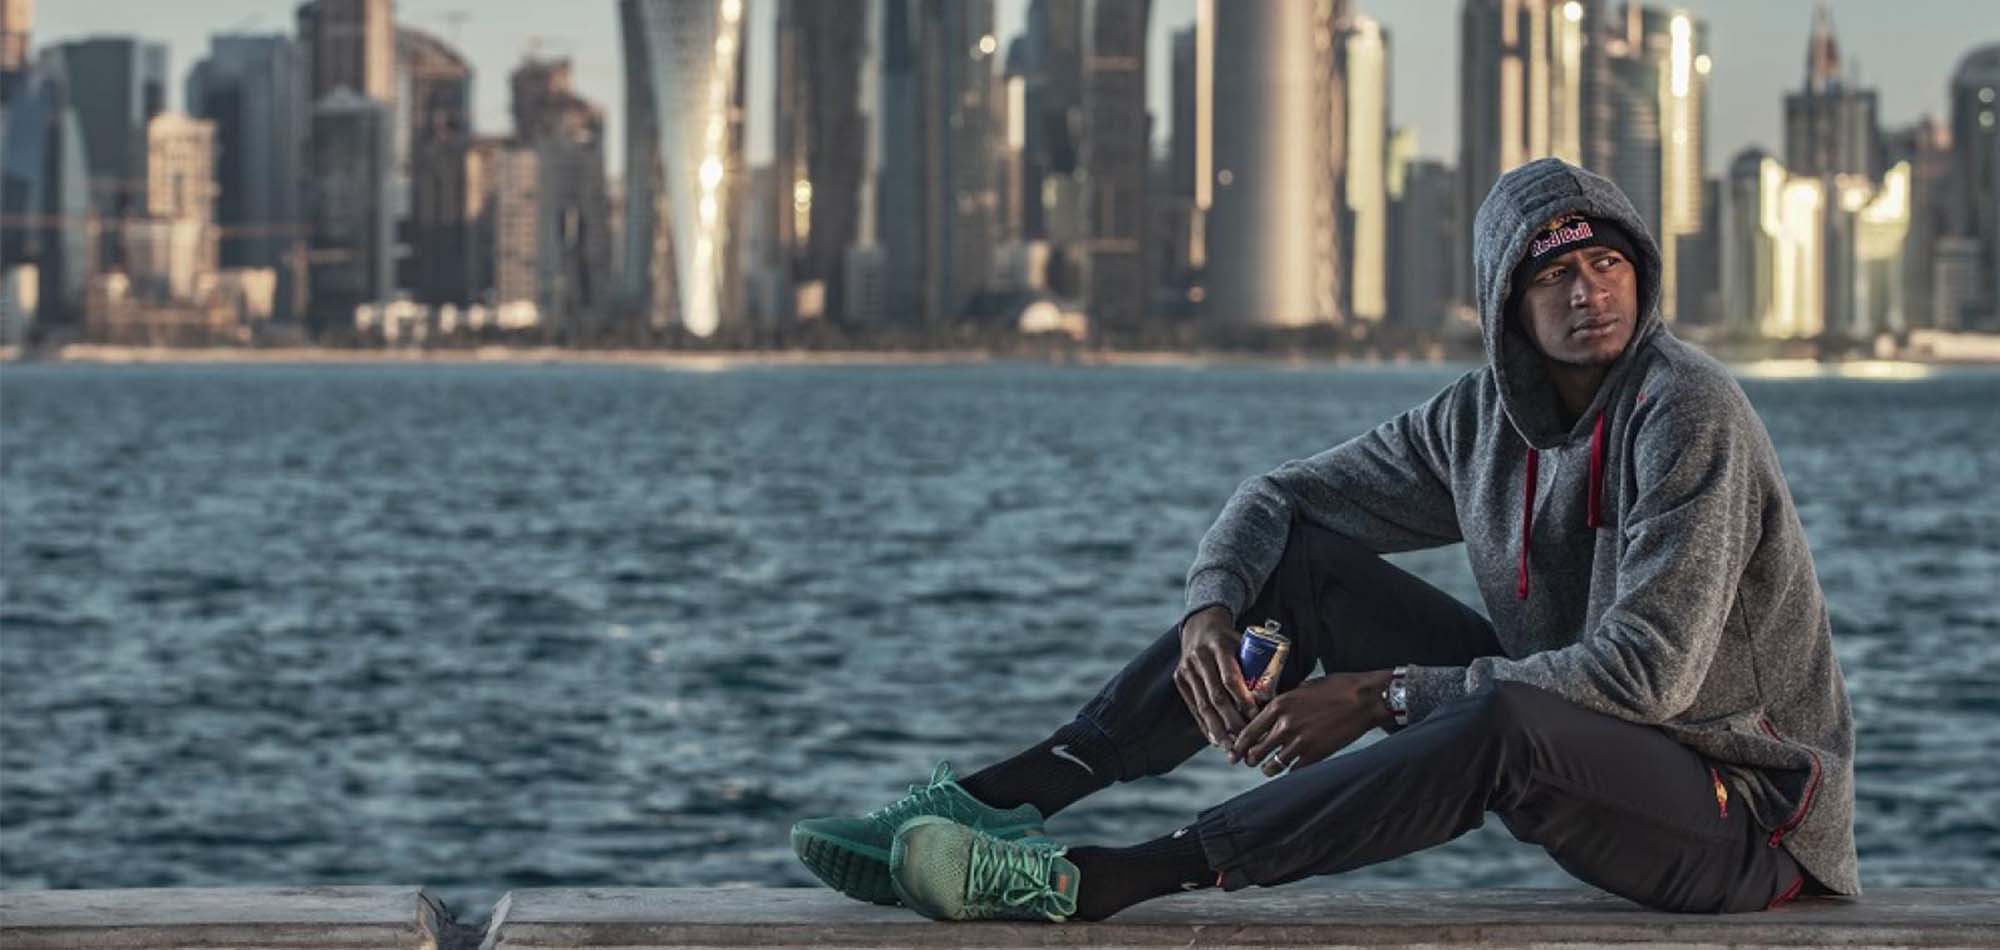 Exclusive interview with Mutaz Barshim, two-time high jump world champion